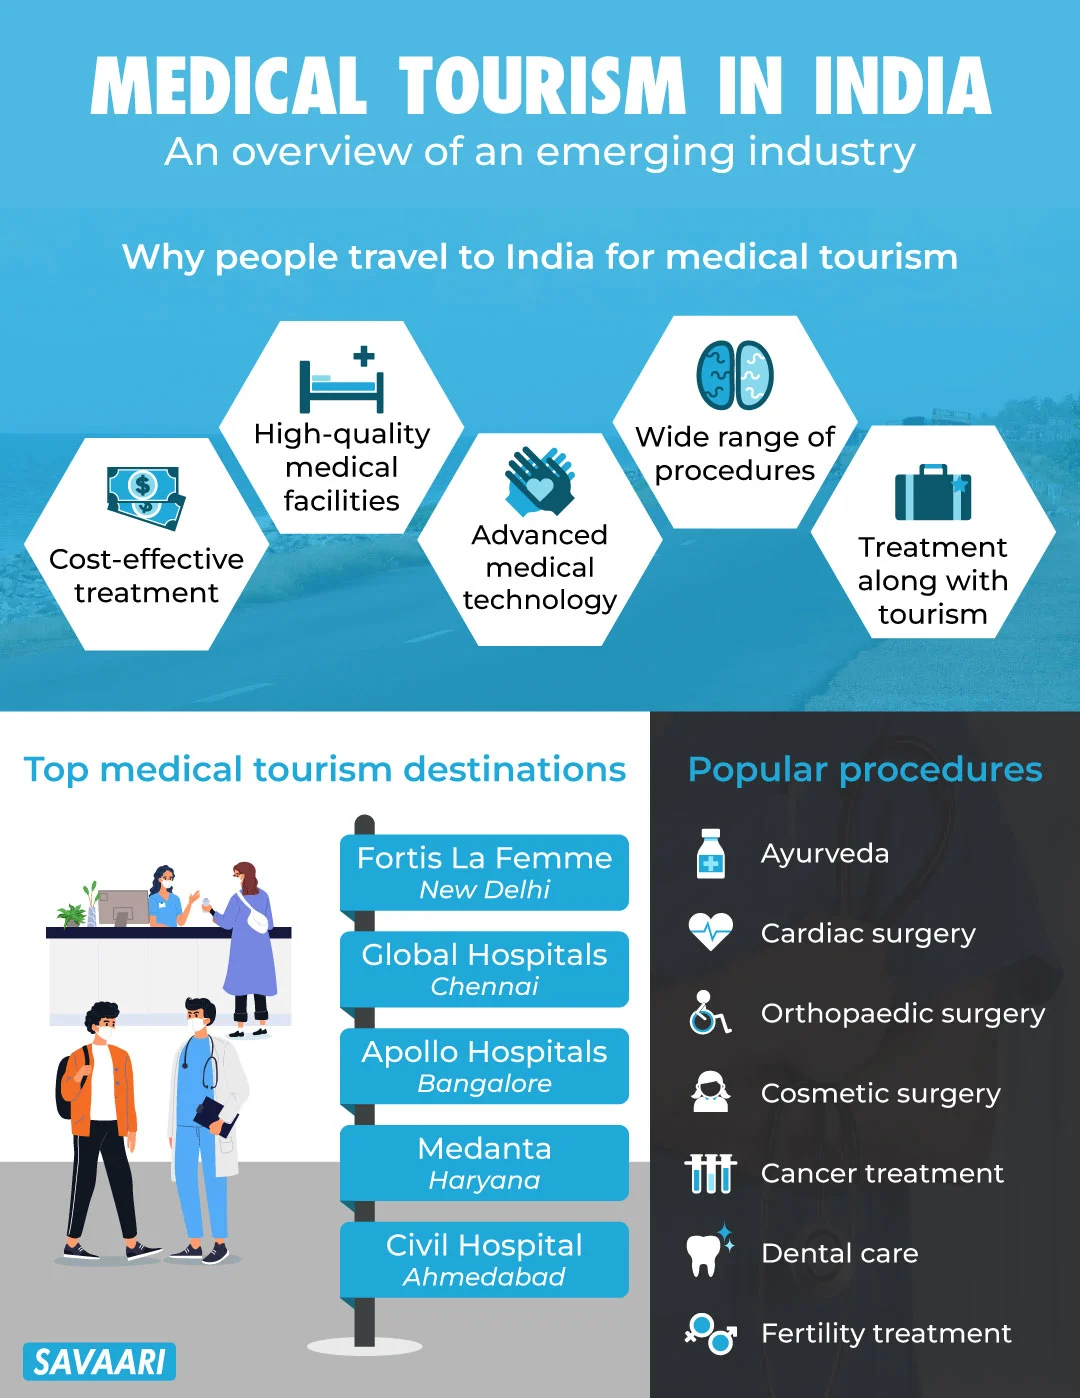 Medical tourism in India - An overview